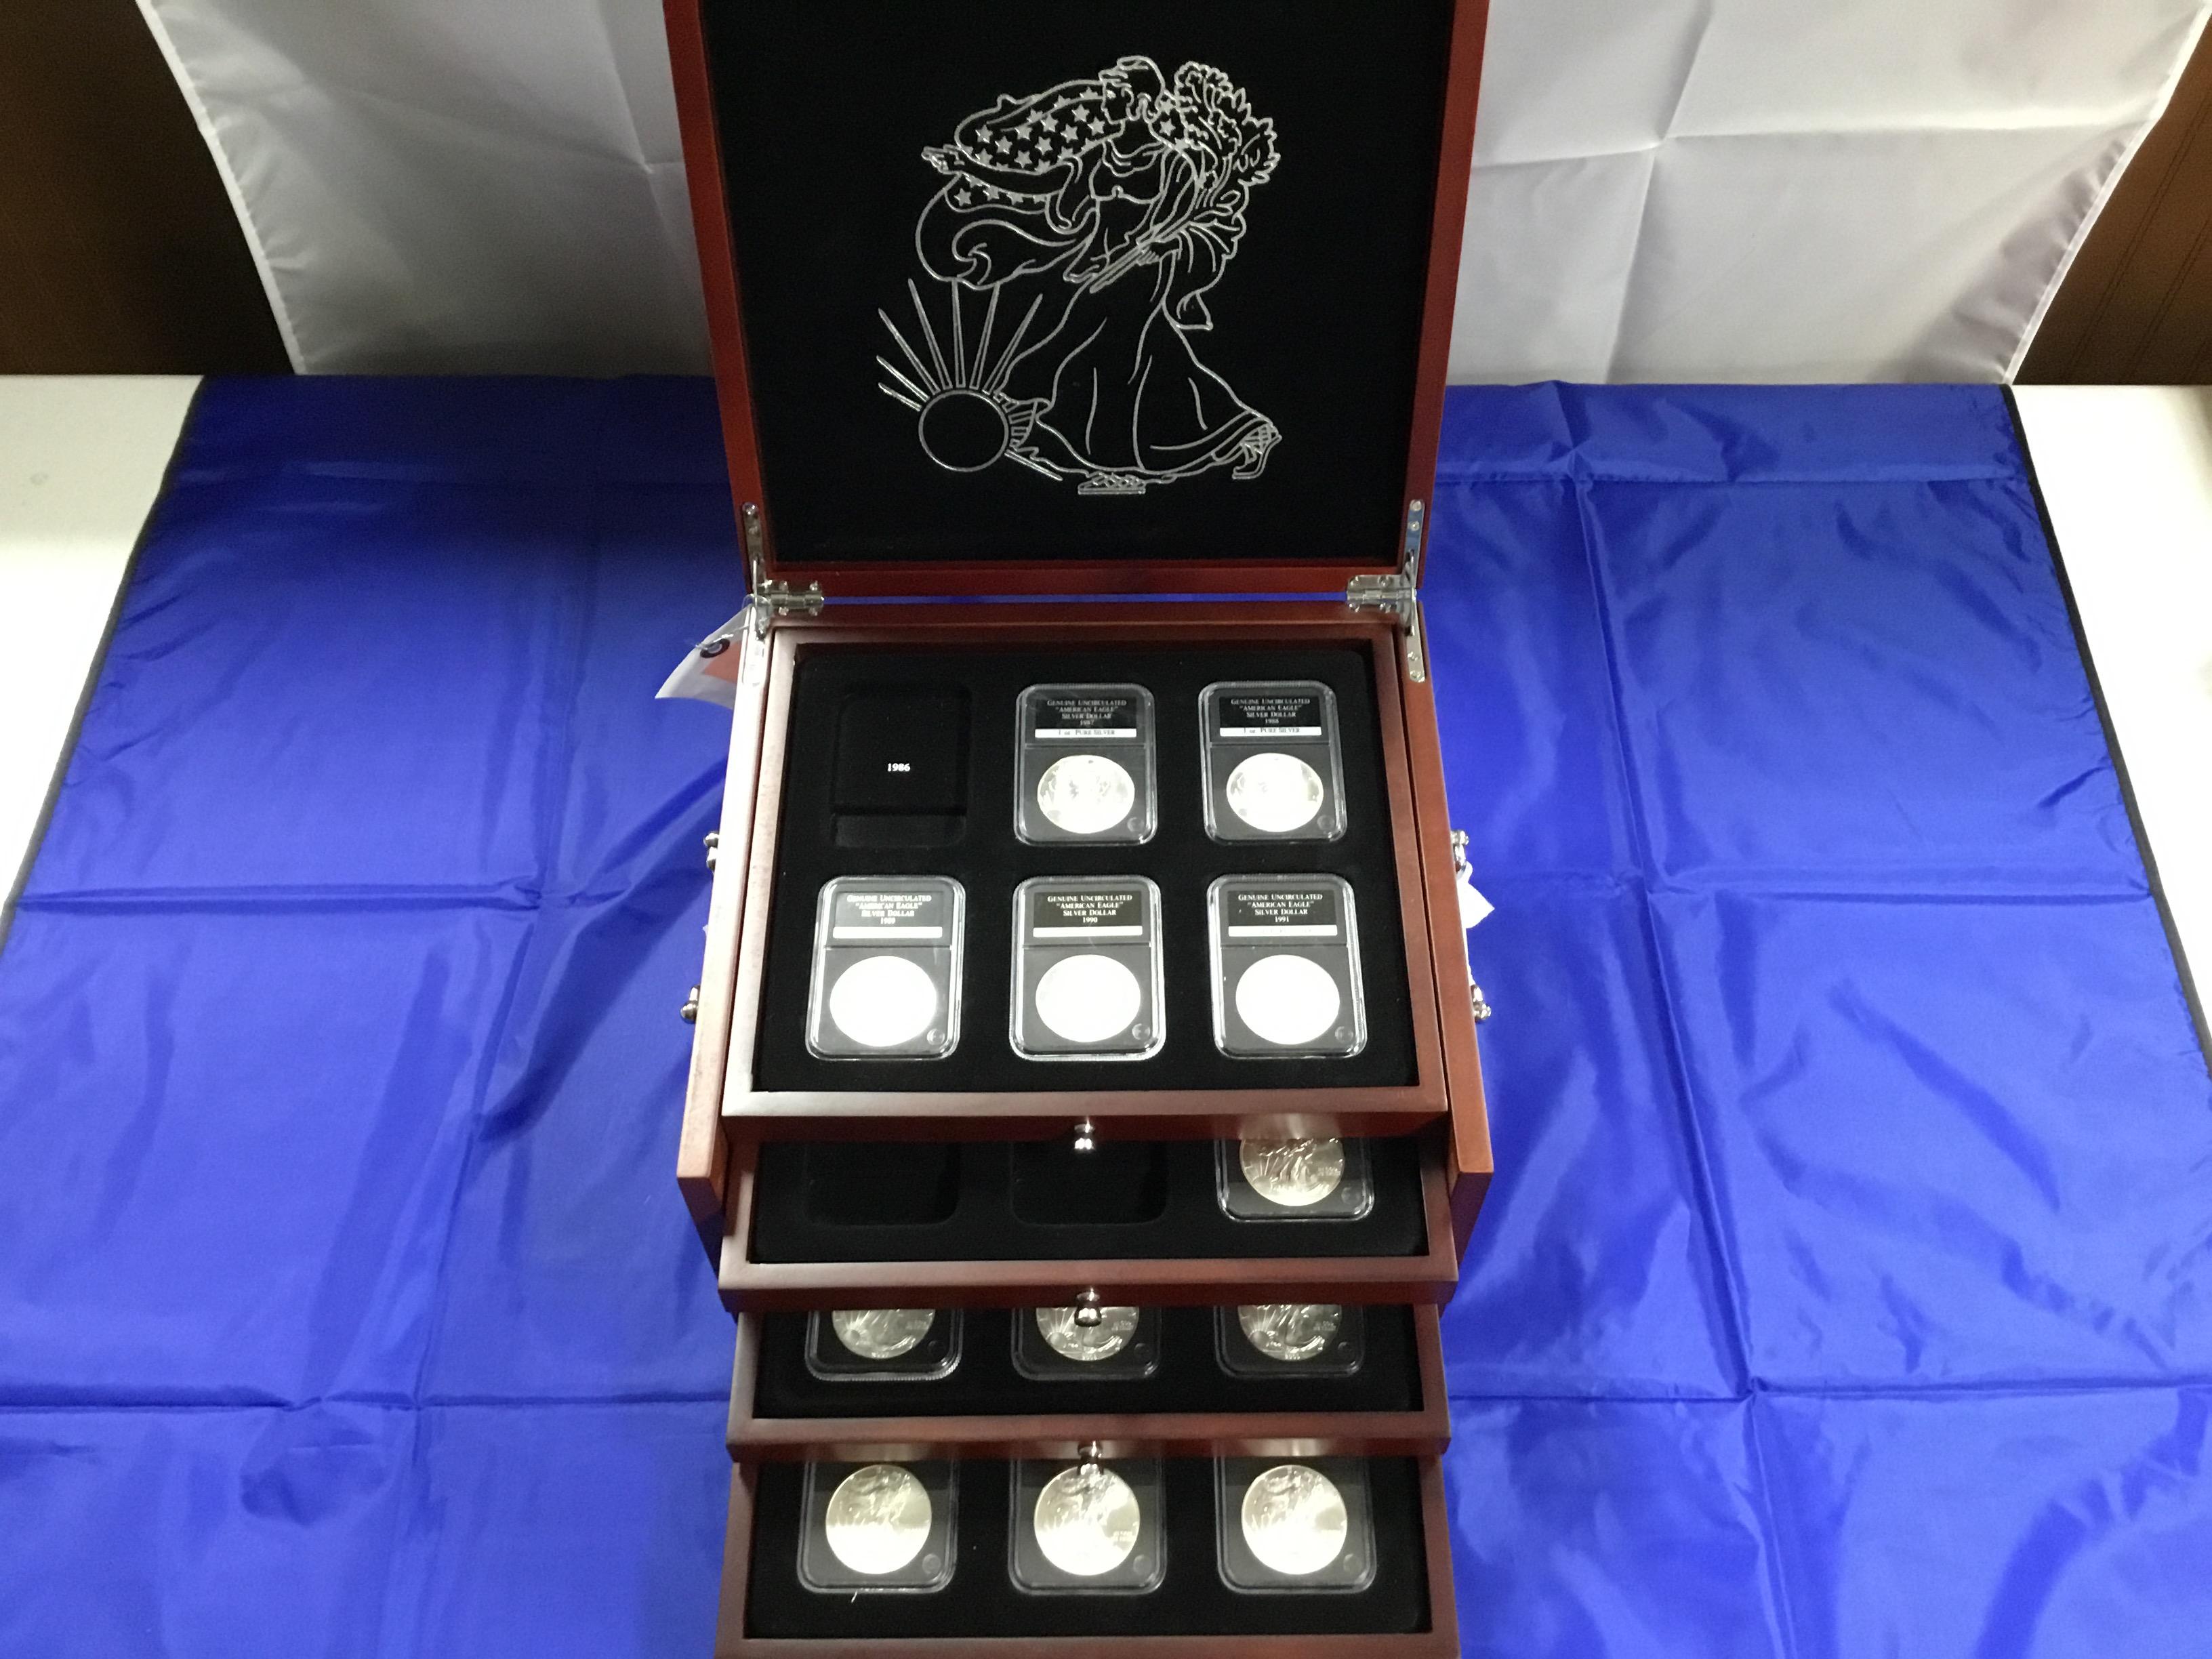 The Uncirculated "American Eagle" Silver Dollar Collection, in Display Case, Velvet Lined, 5 Drawers